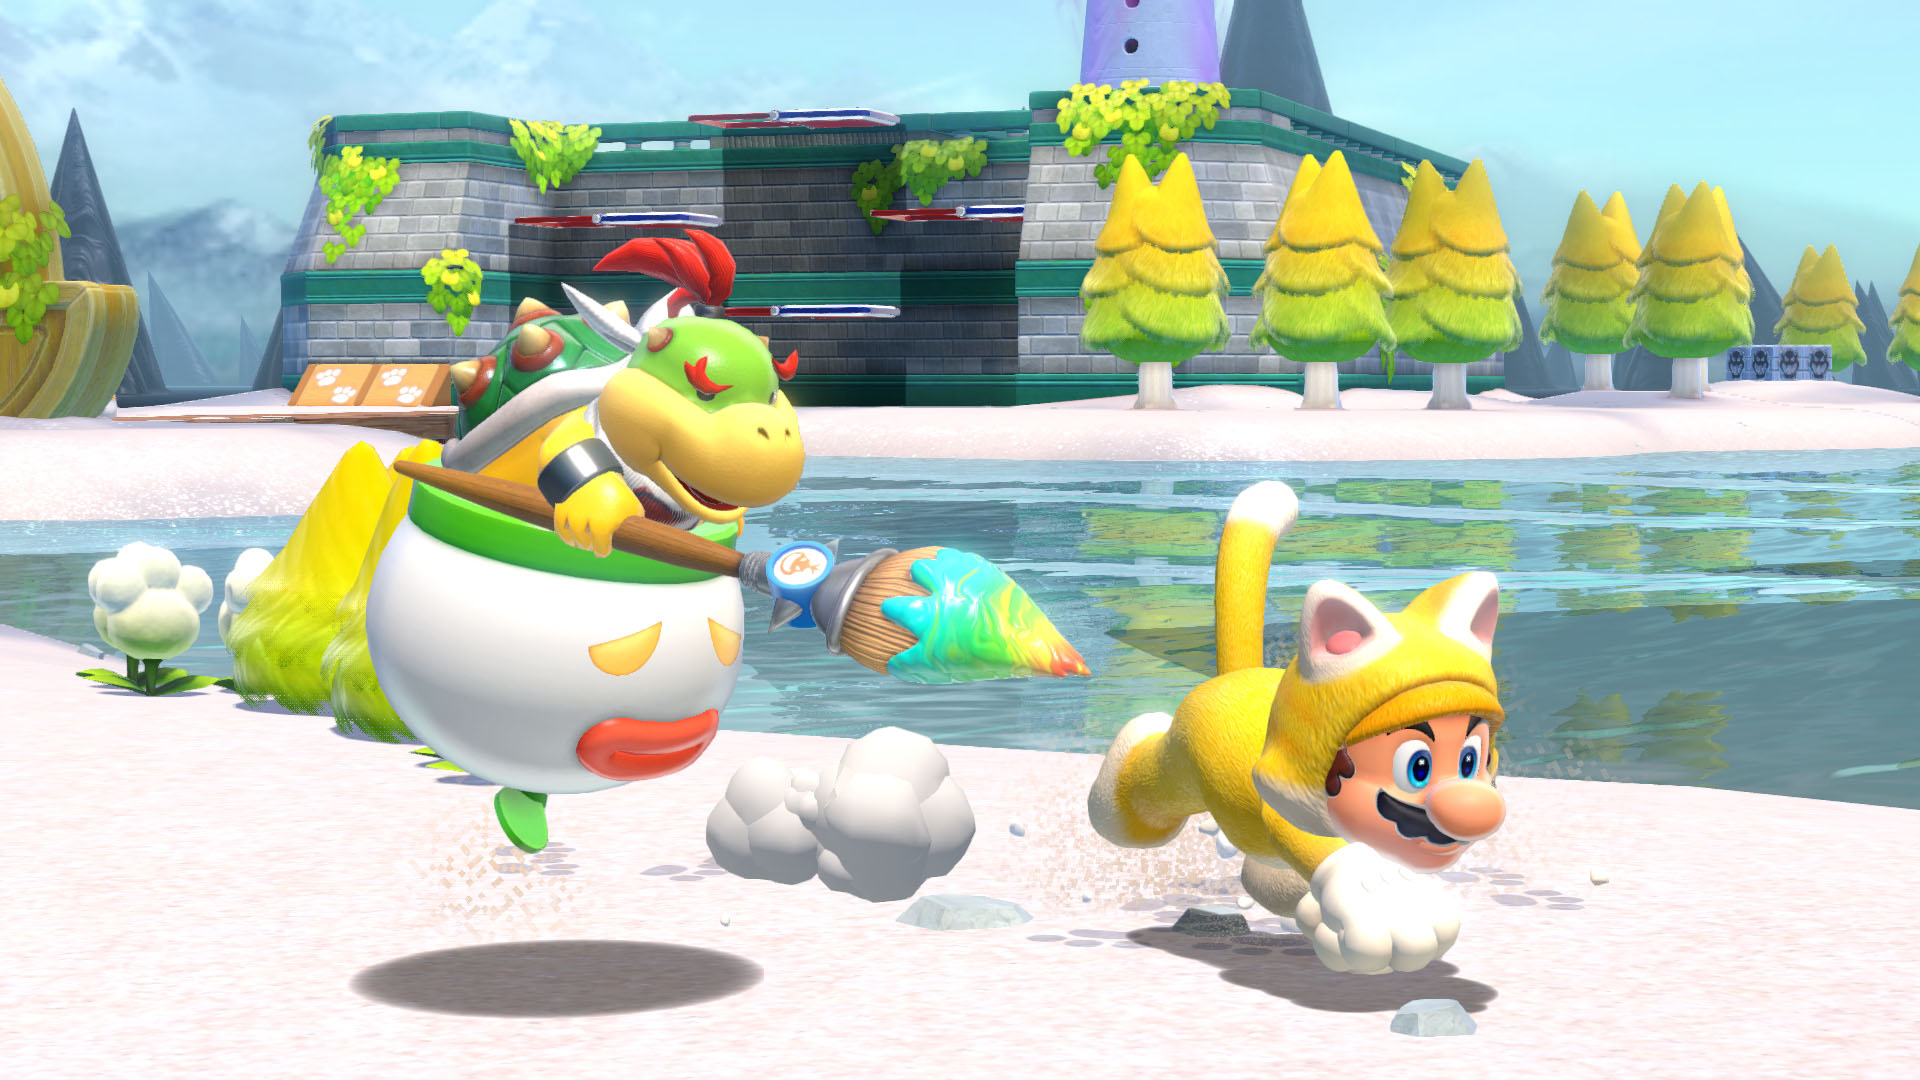 Video Game Super Mario 3D World + Bowser’s Fury HD Wallpaper | Background Image